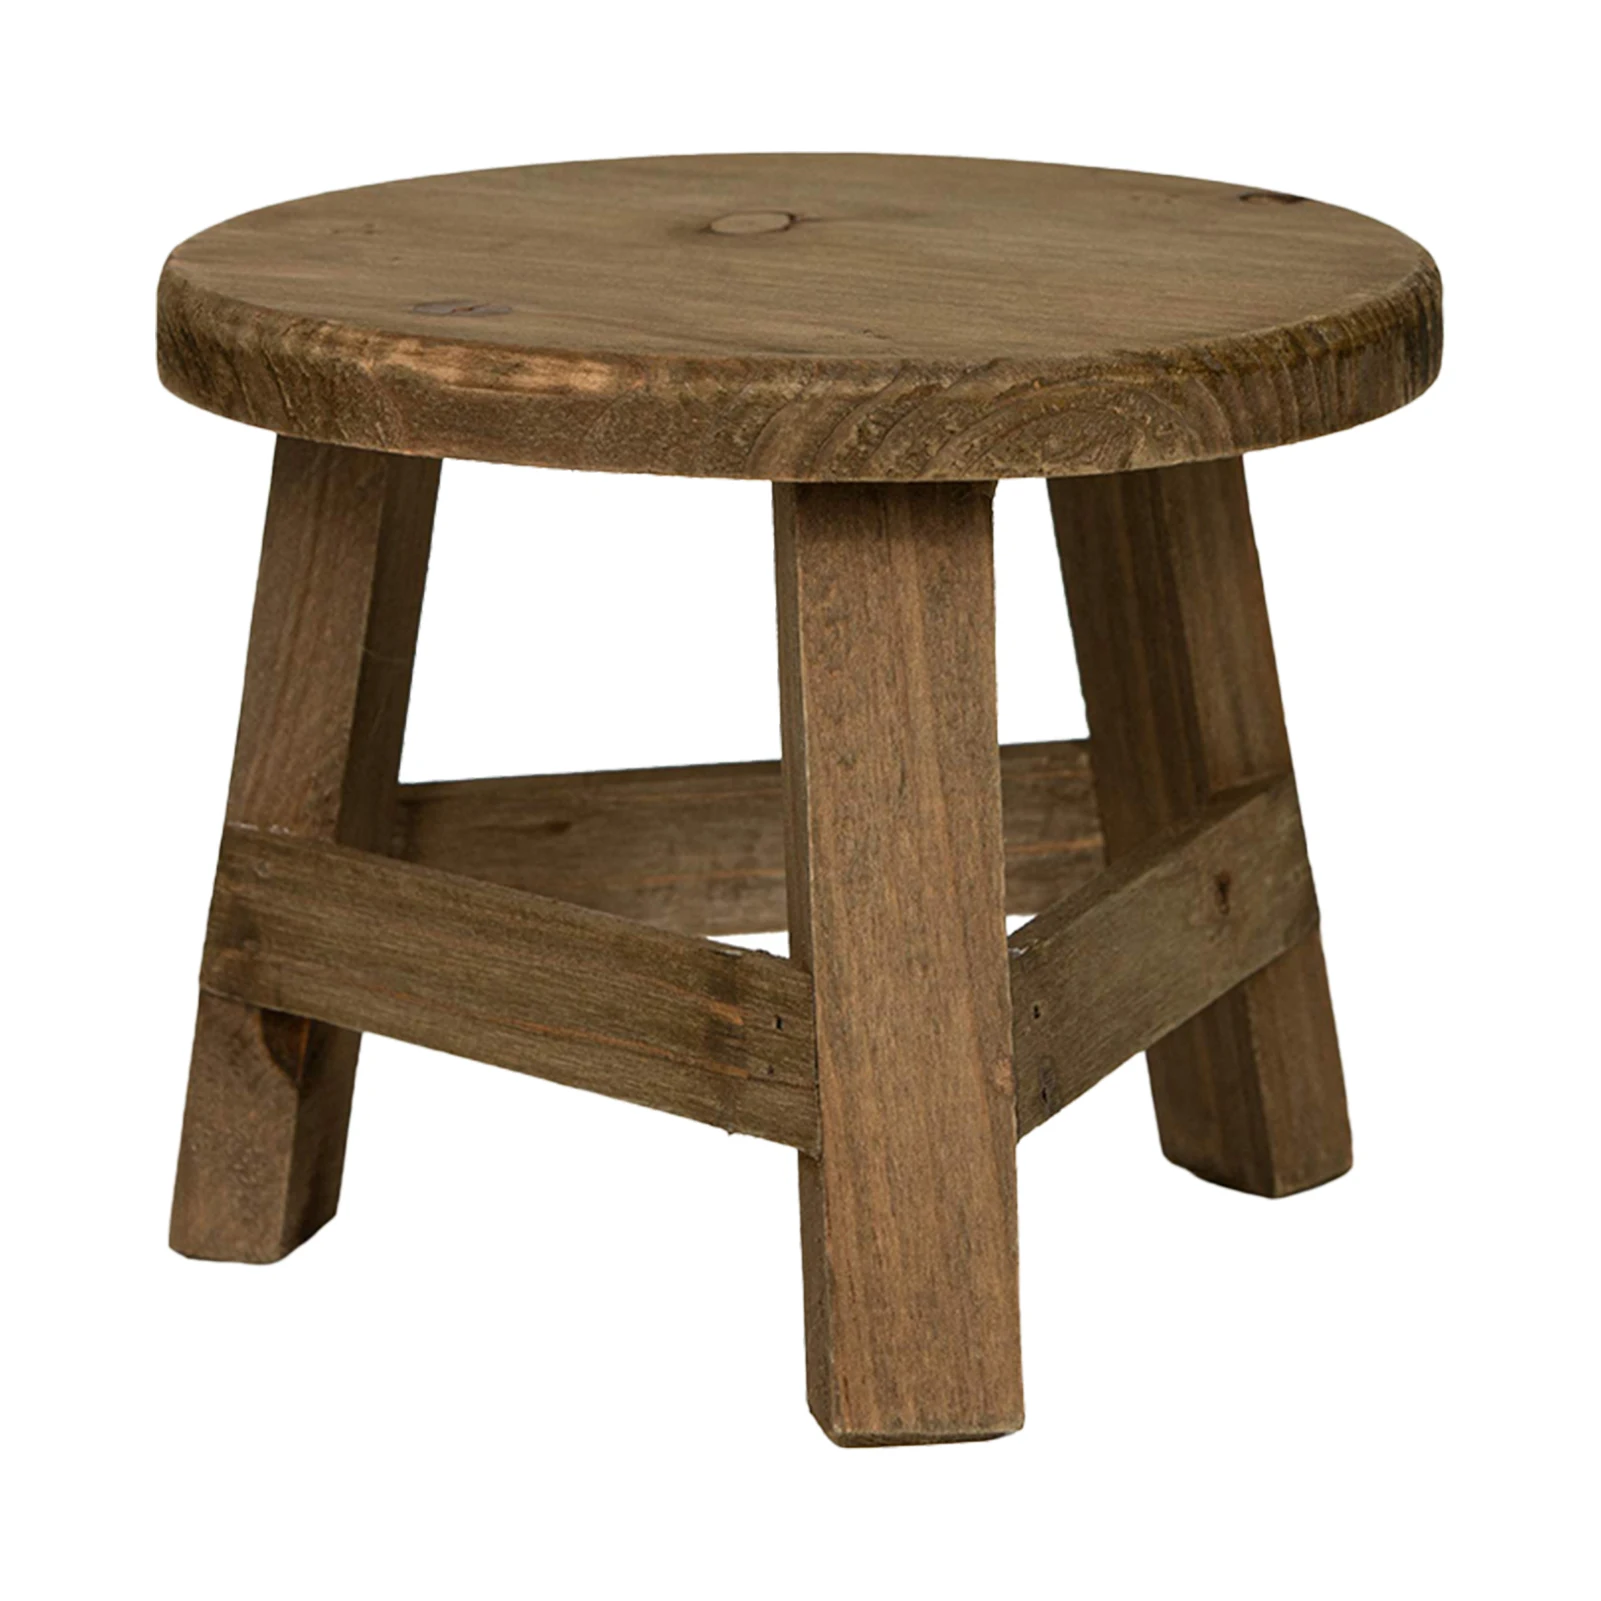 Durable Bonsai Home Decor High Stool Entryway Indoor Round Floor For Lounge Display Outdoor Modern Plants Stand Wooden